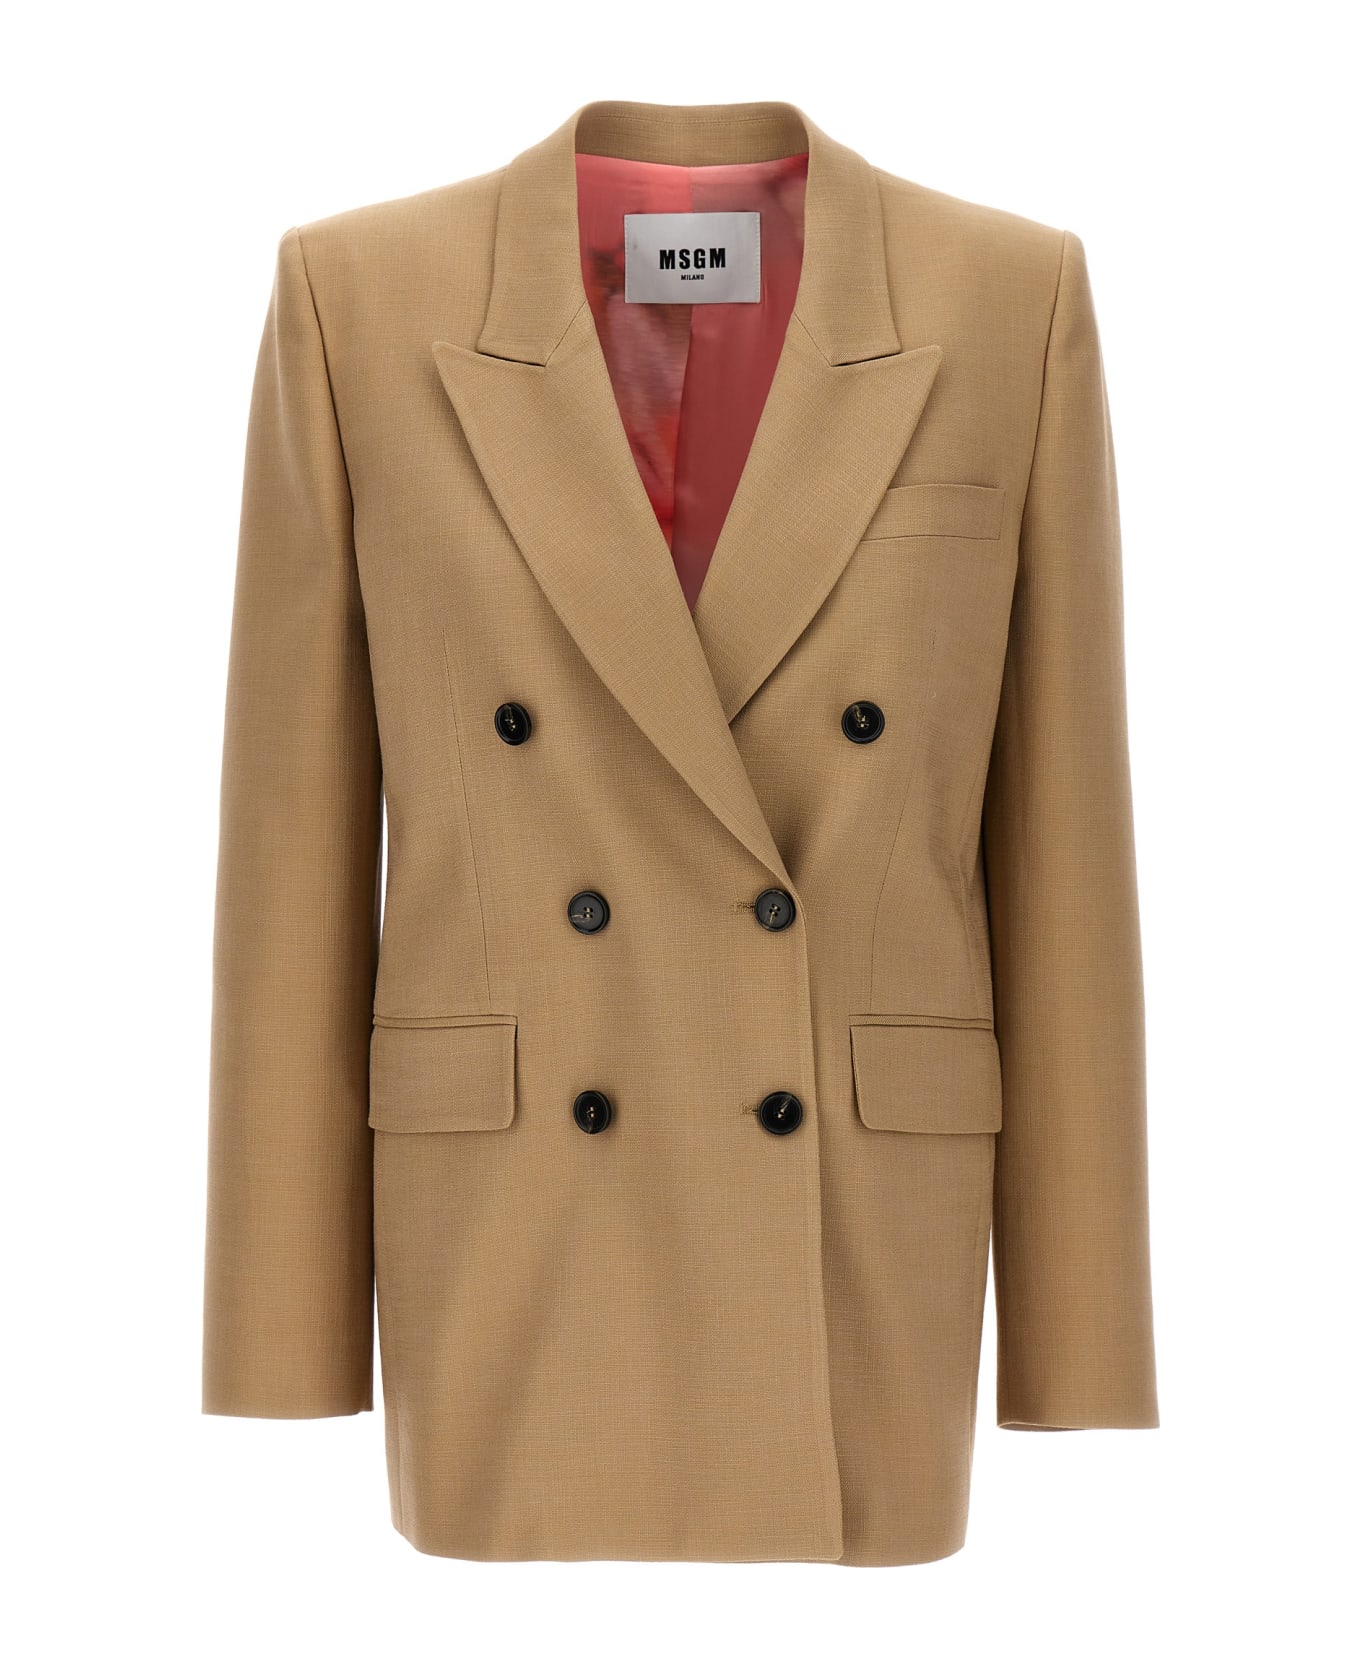 MSGM Double-breasted Blazer - Beige